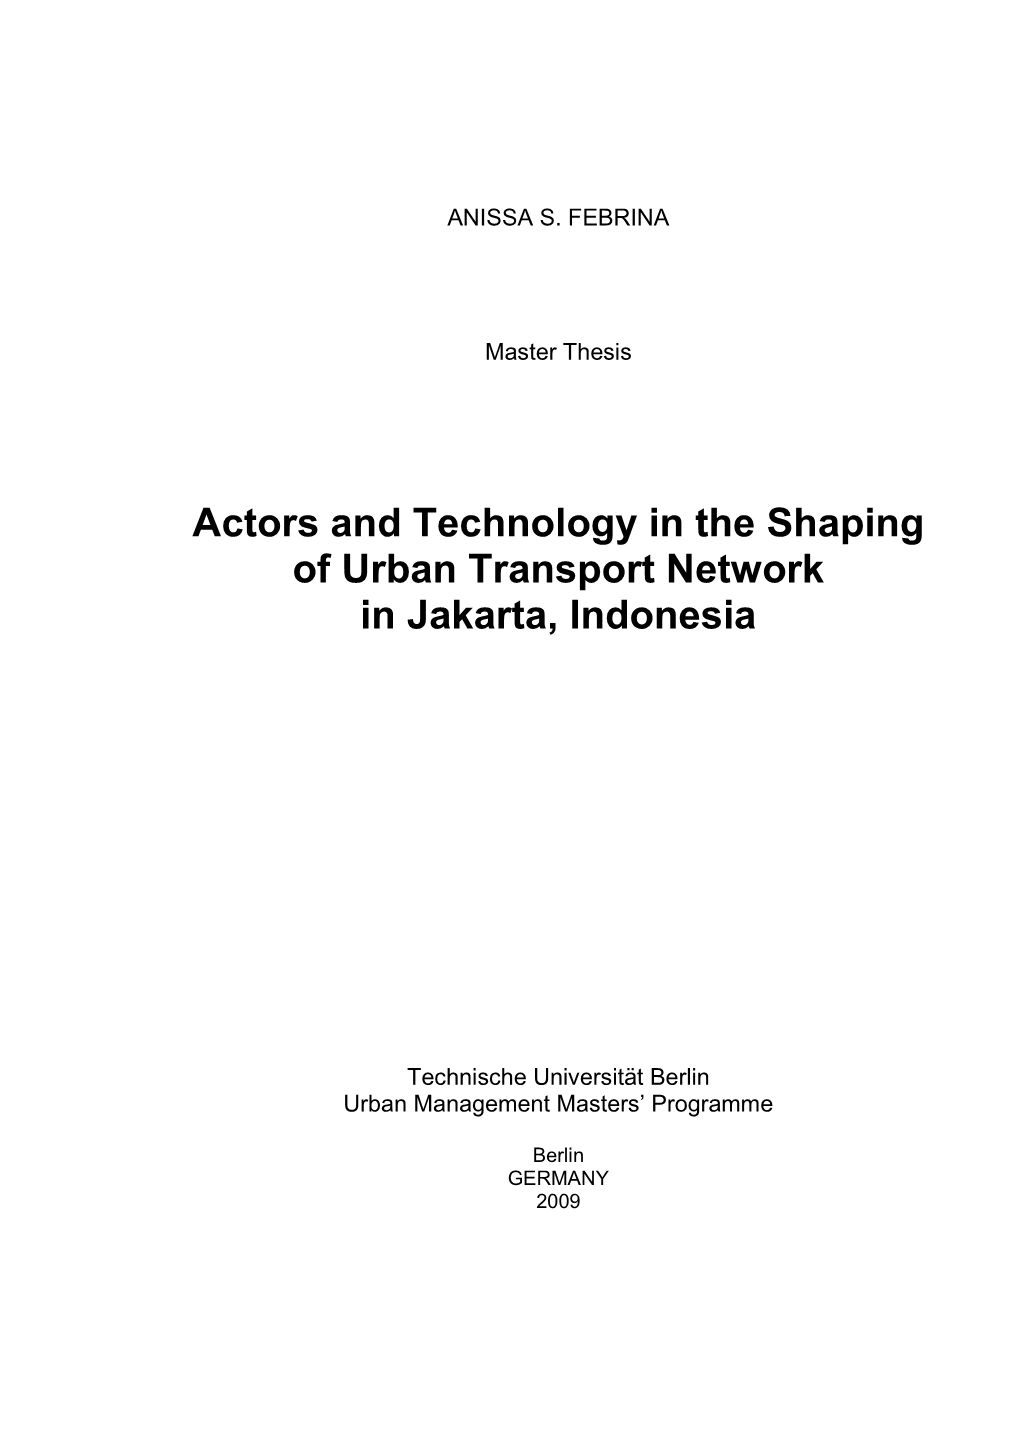 Actors and Technology in the Shaping of Urban Transport Network in Jakarta, Indonesia